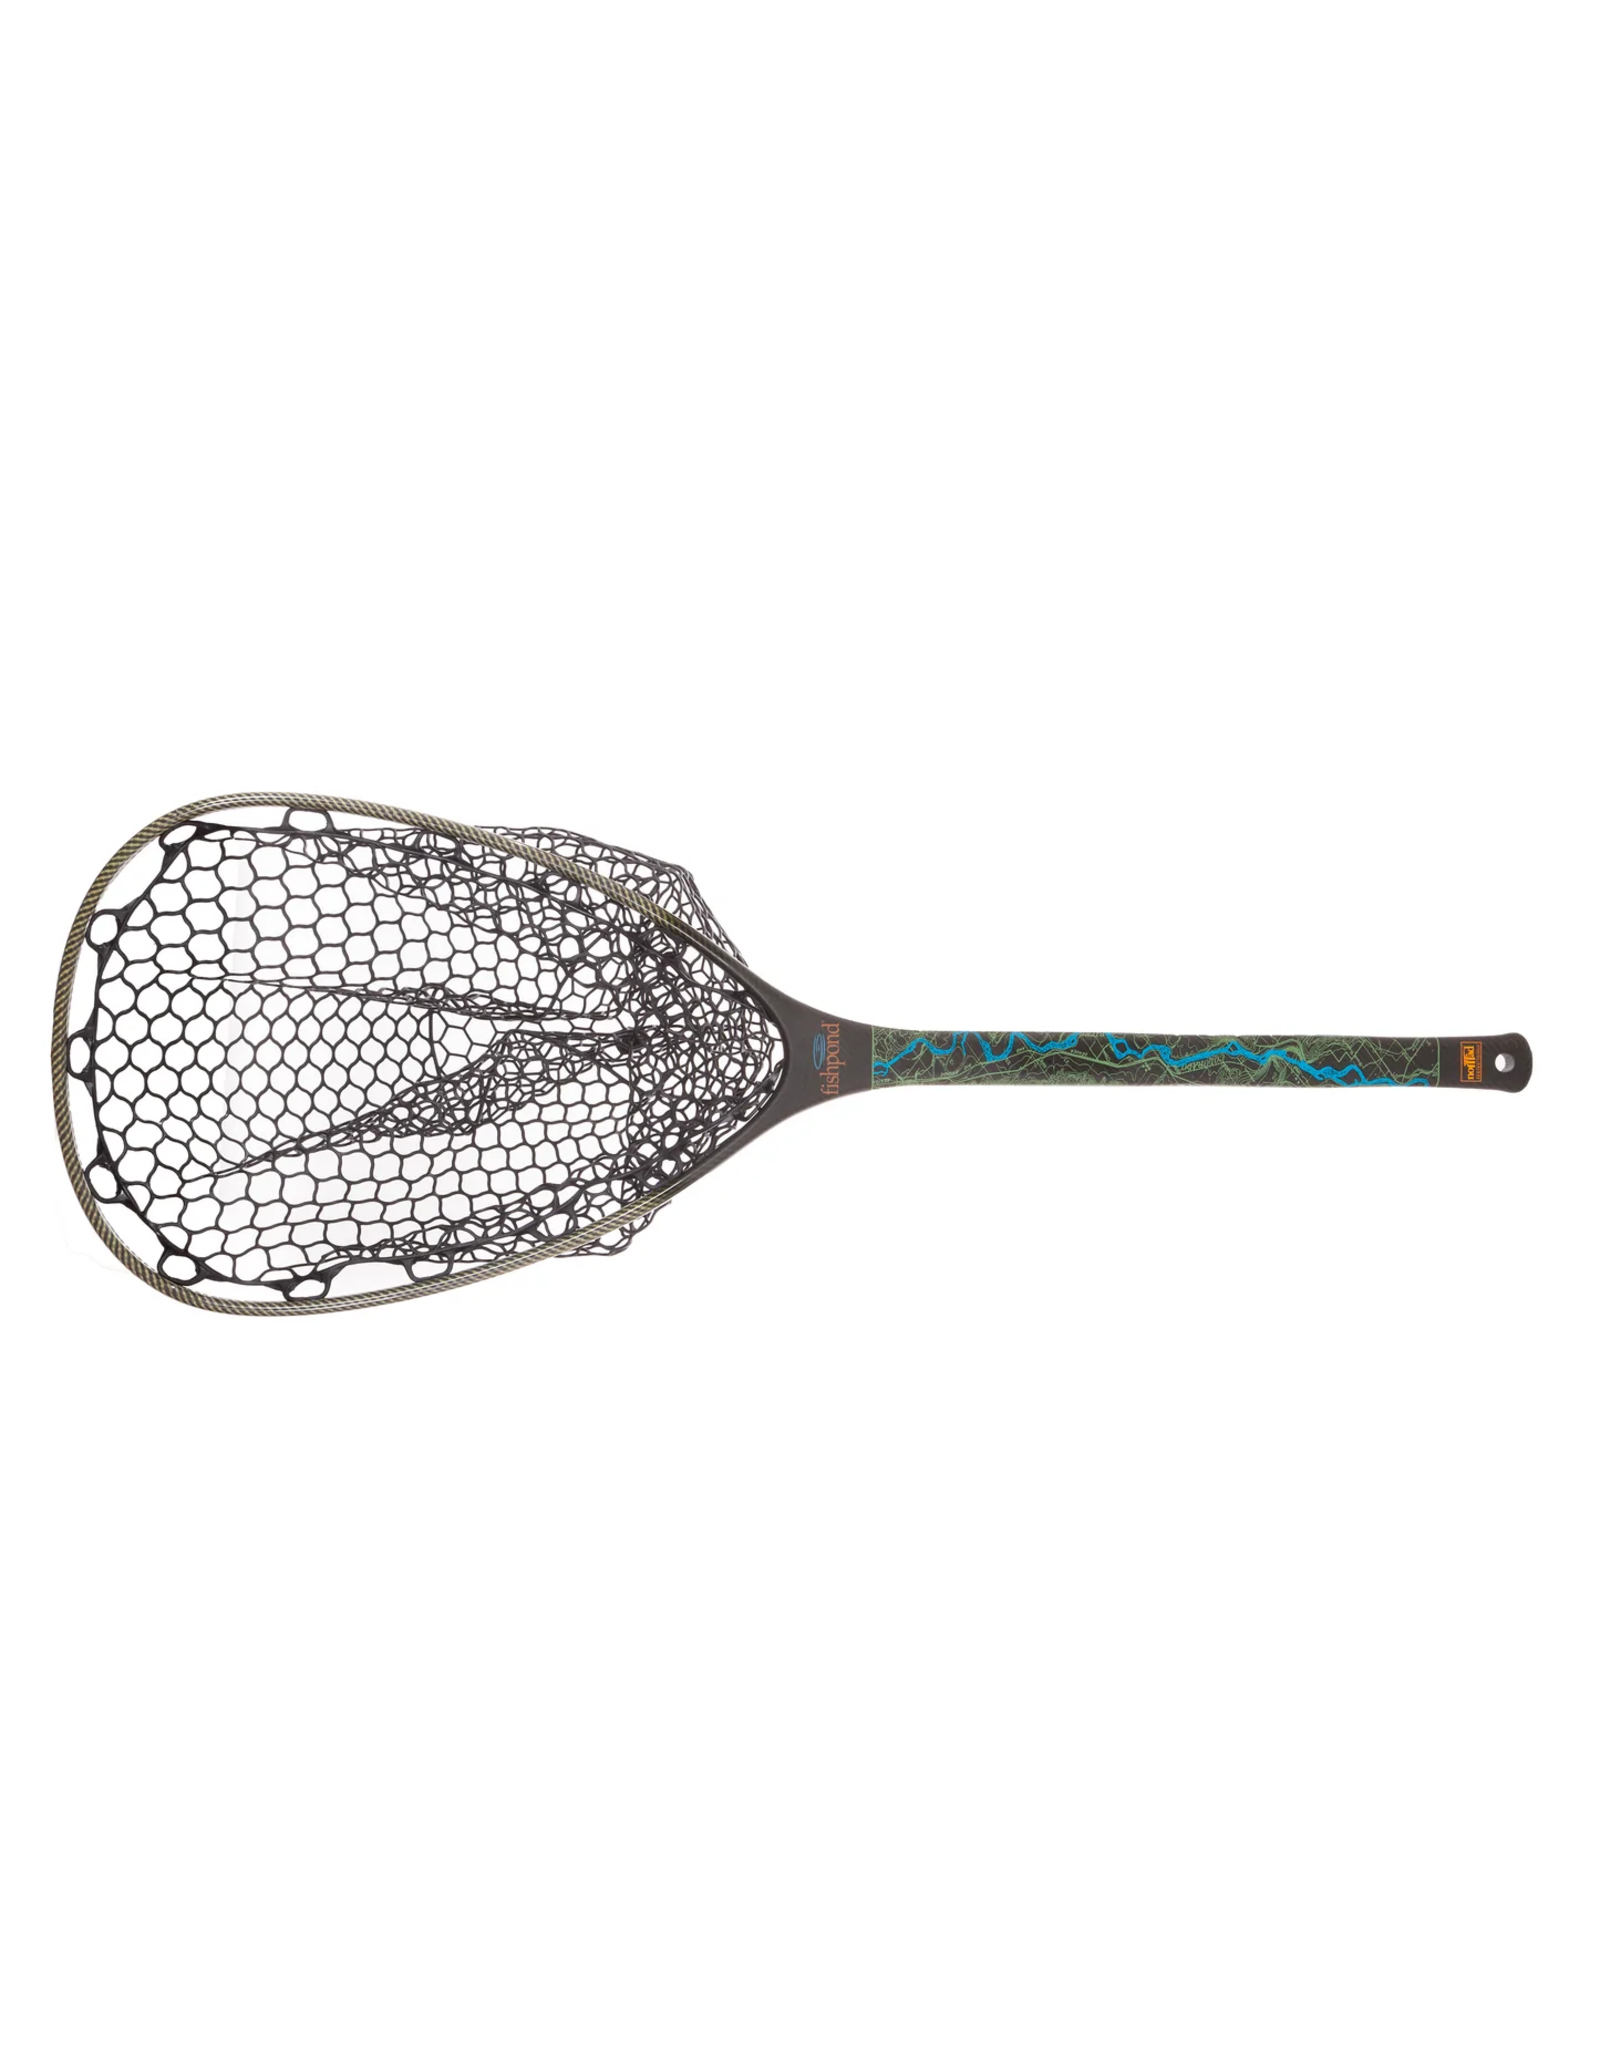 Fishpond Fishpond - Nomad Mid Length Net - American Rivers